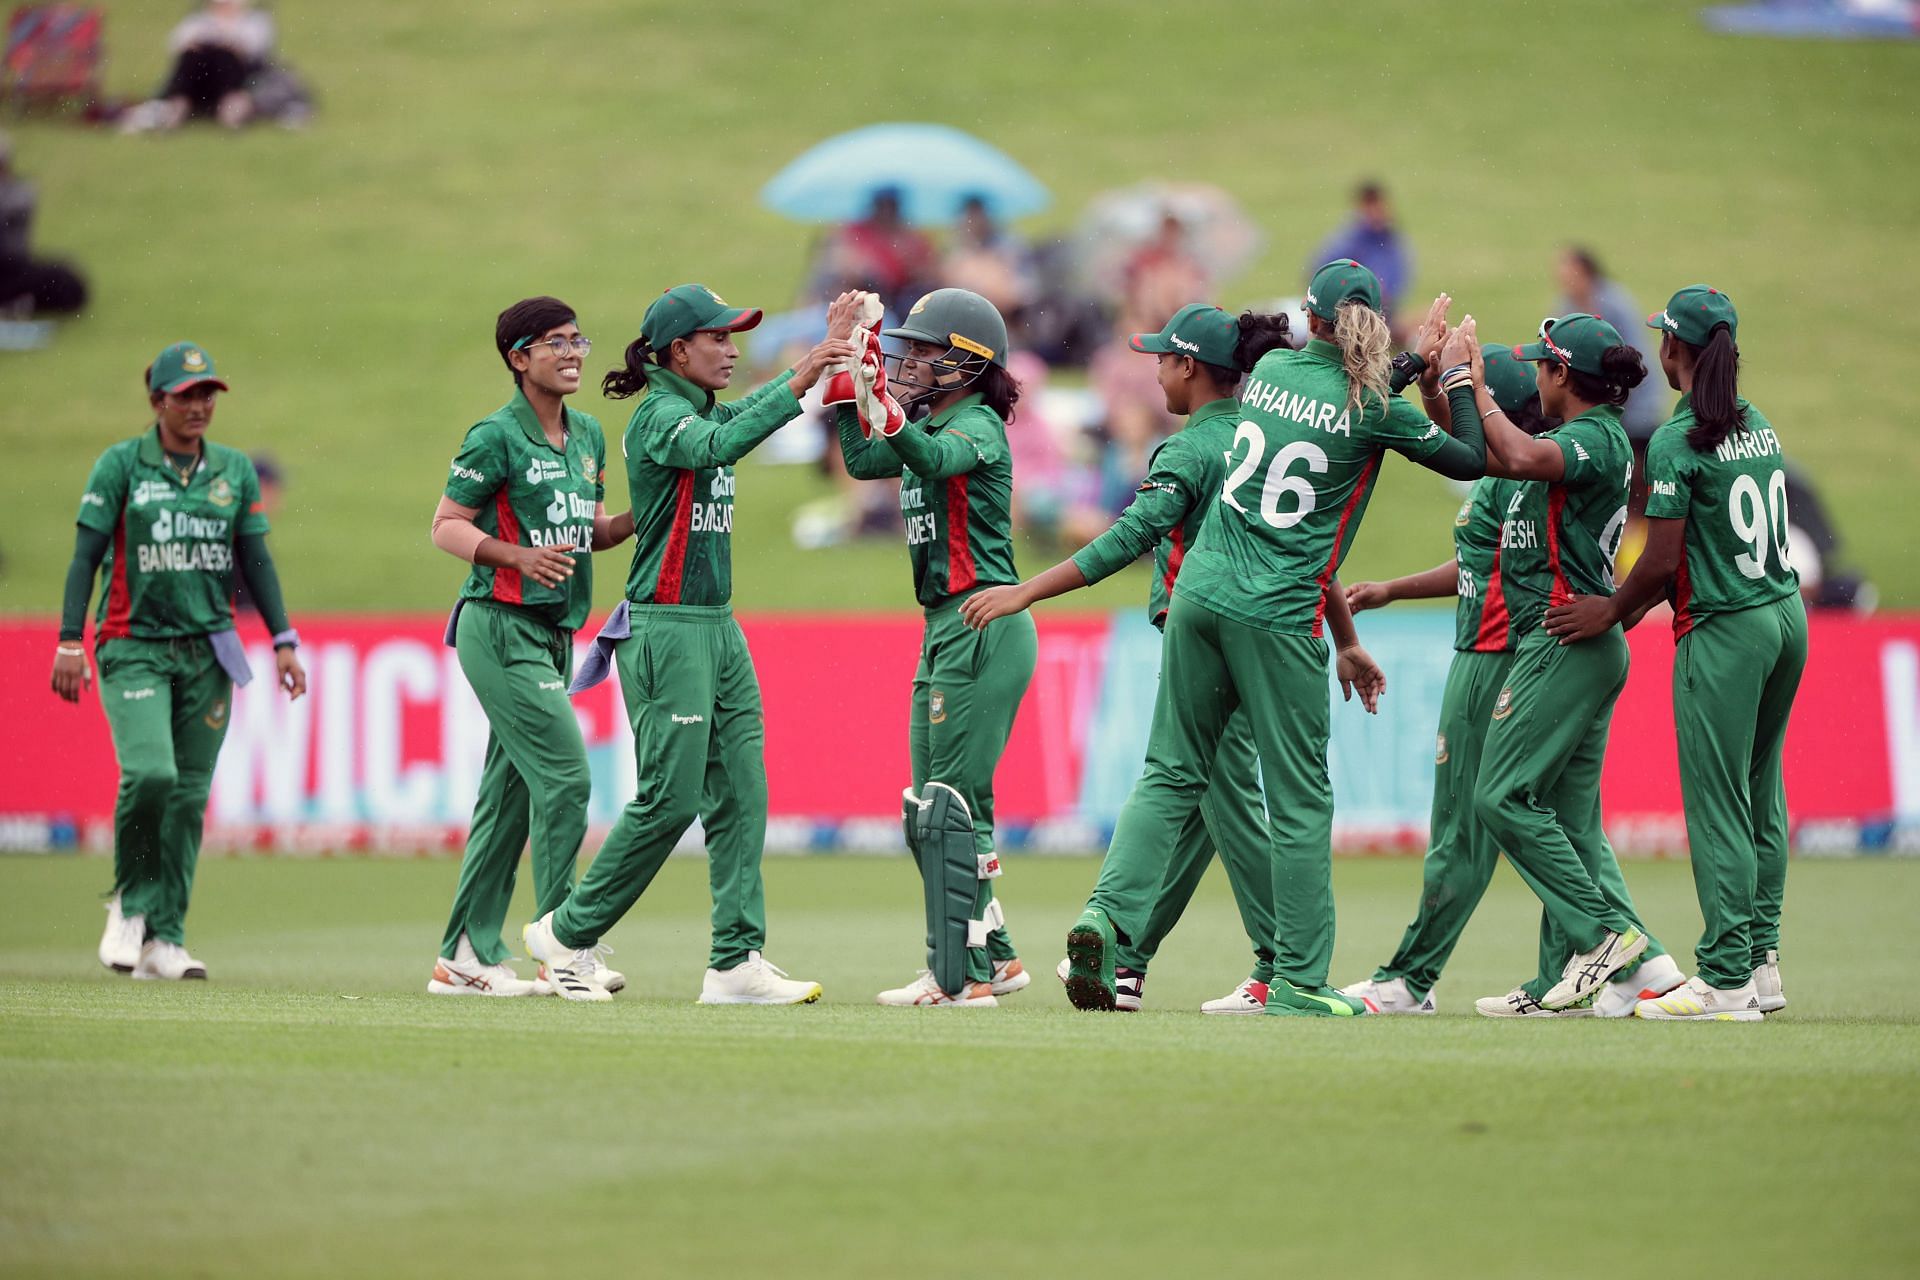 Bangladesh have done well in ODIs in recent times